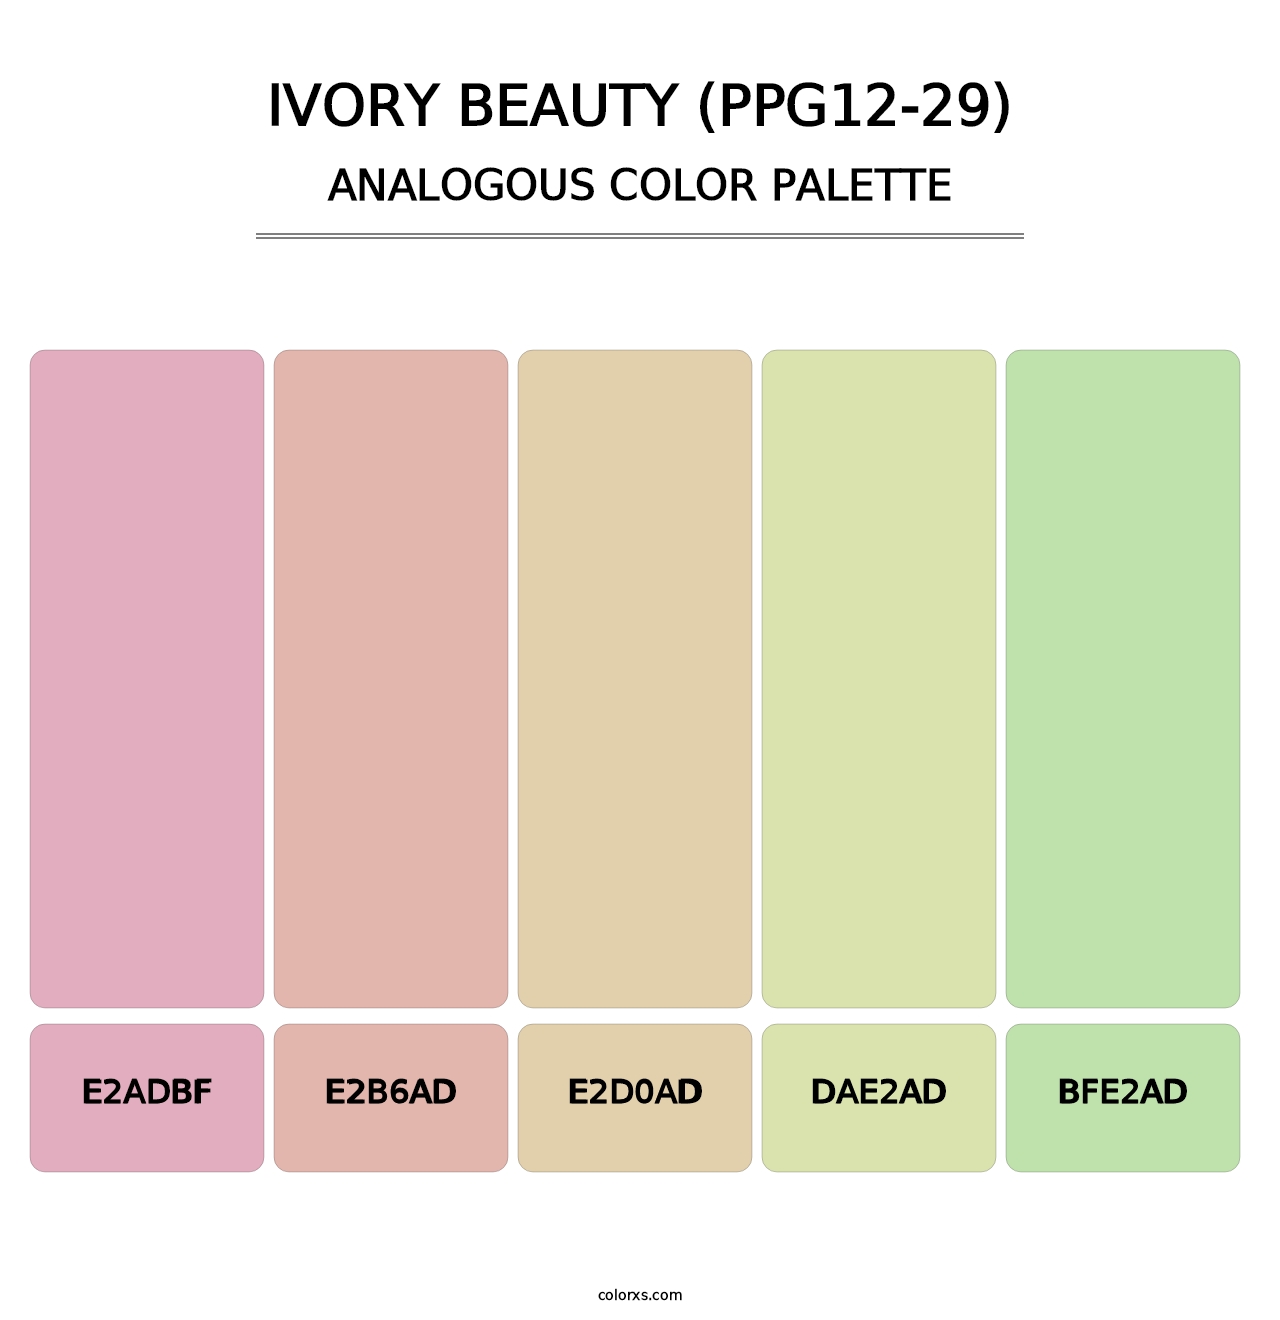 Ivory Beauty (PPG12-29) - Analogous Color Palette